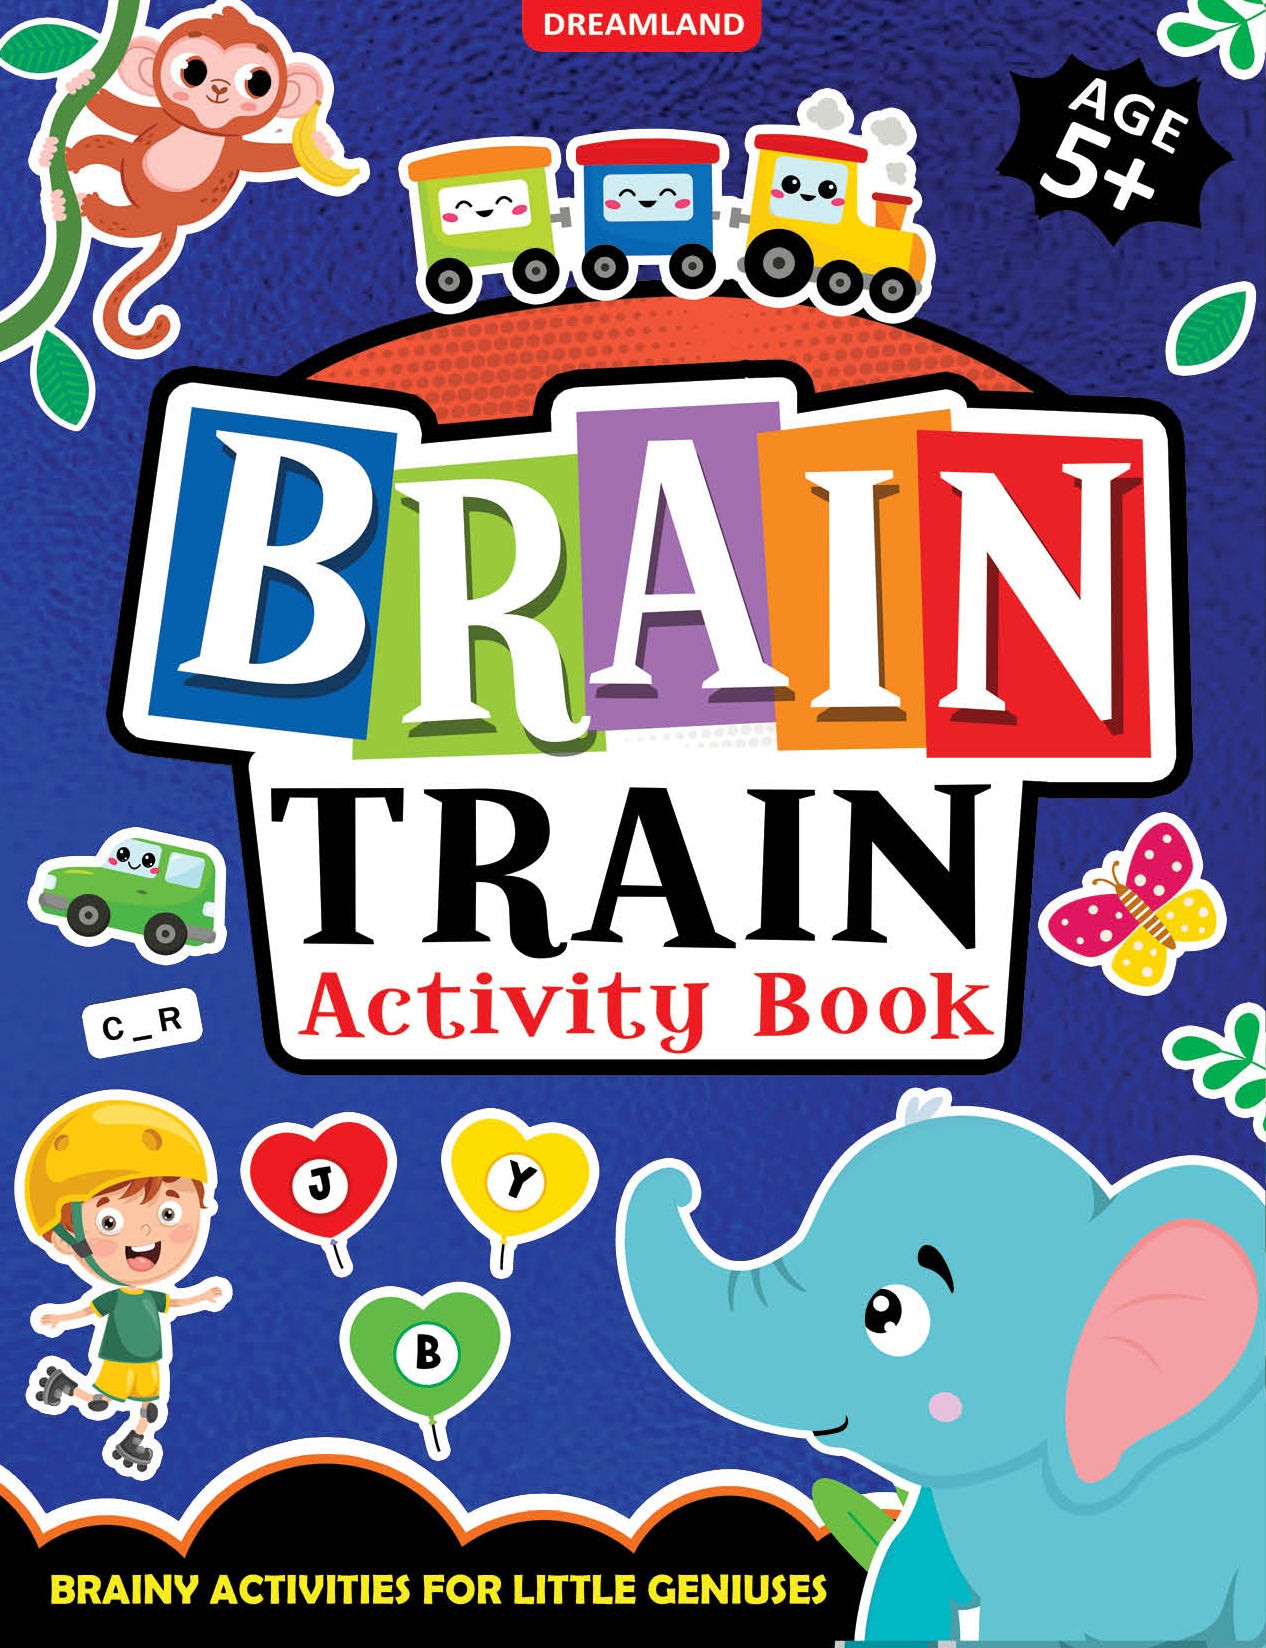 Brain Train Activity Book for Kids Age 5+ – With Colouring Pages, Mazes, Puzzles and Word searches Activities